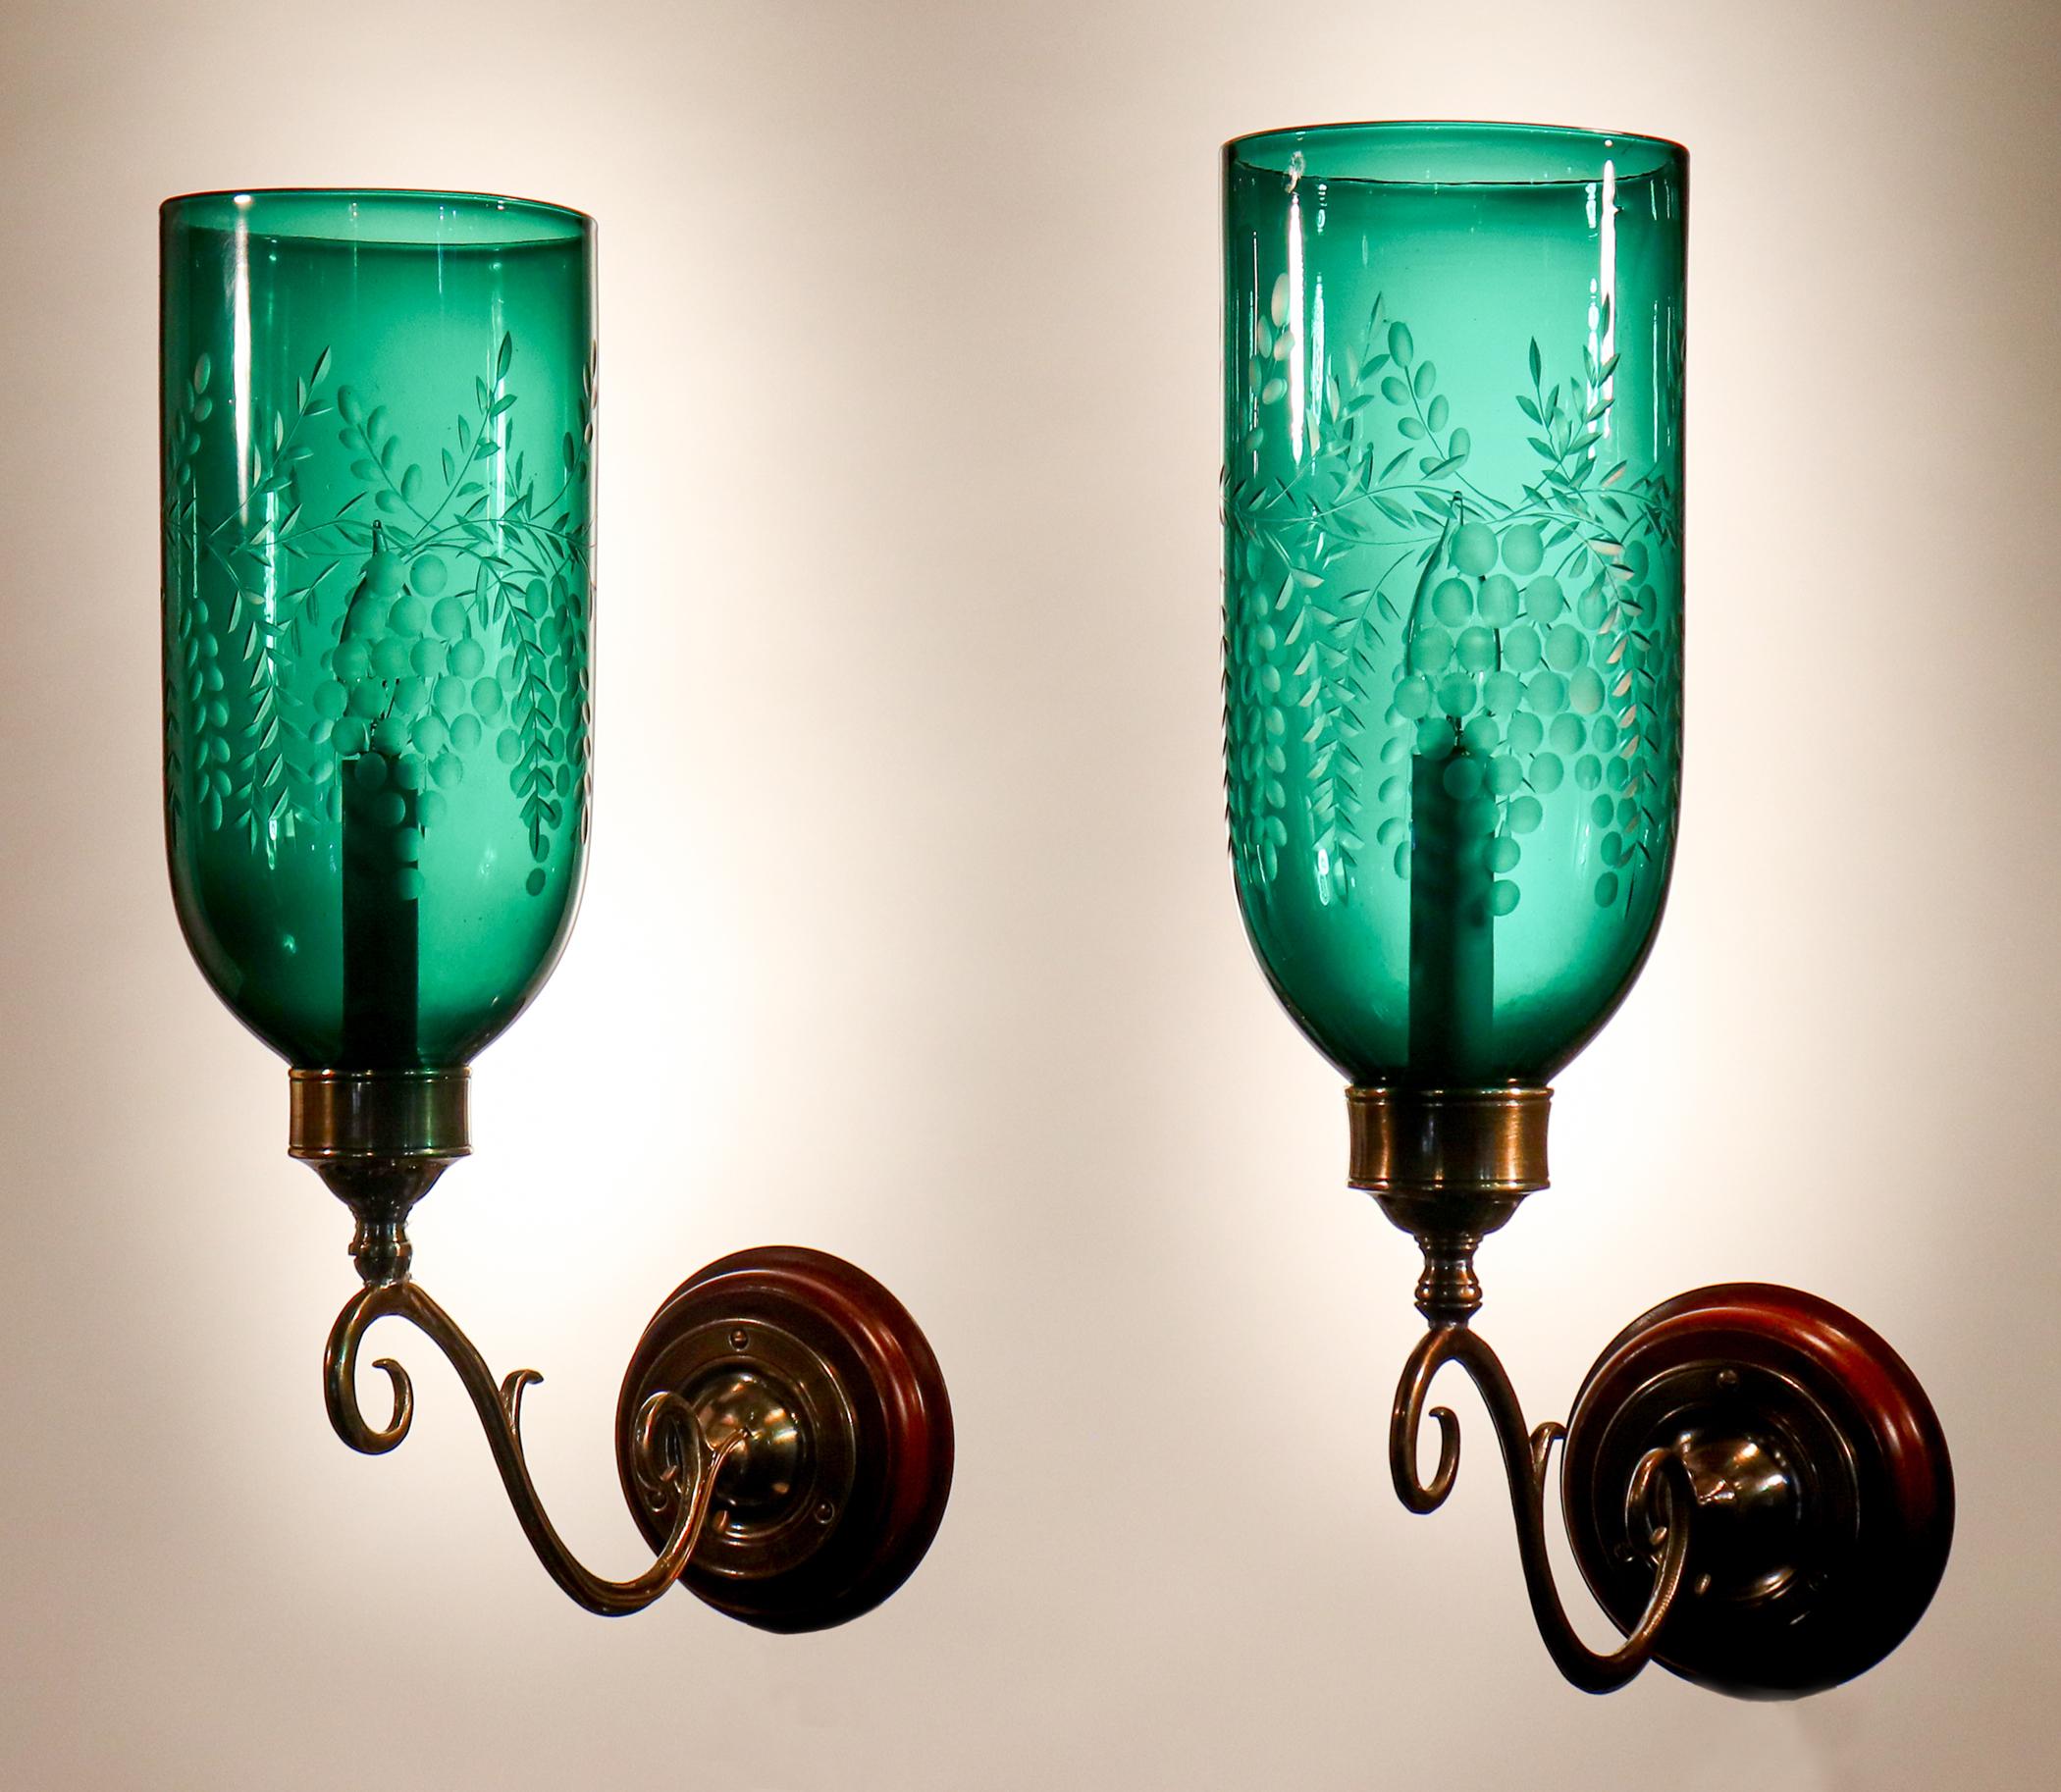 An exceptional pair of English hurricane shade sconces, circa 1890, with a deep green hue. These authentic hand blown glass shades have lovely straight form and are etched with a Classic grape motif. The wall sconces are newly electrified, with each